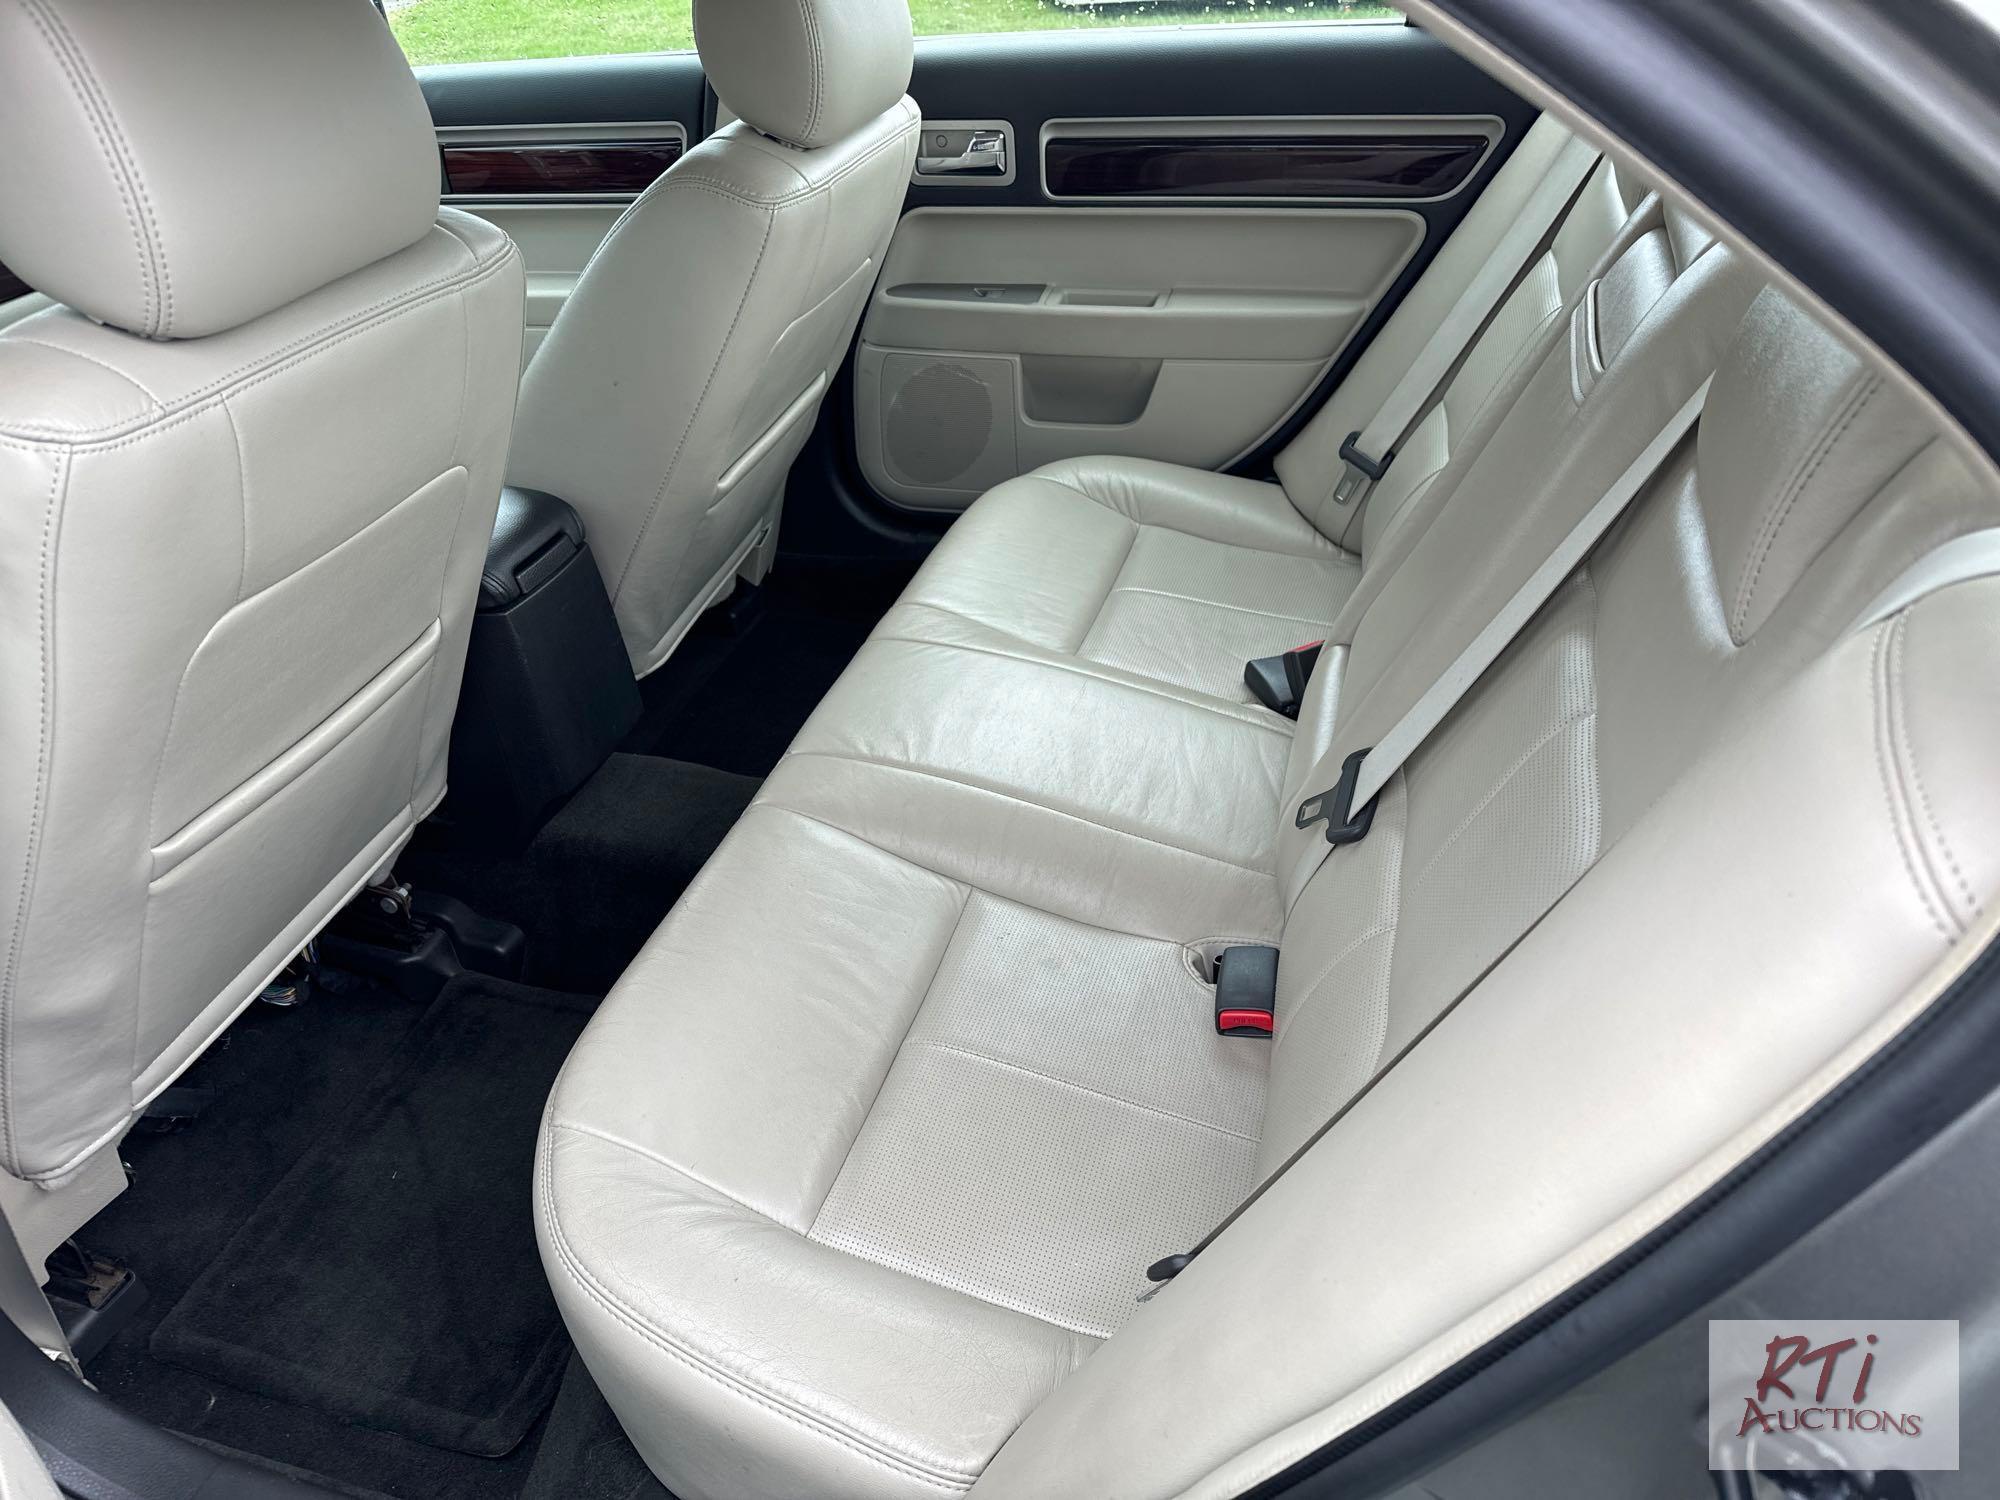 2008 Lincoln MKZ 4 door sedan, AWD, leather, PW, PL, A/C, heated and cooled seats, 198,059 miles.,